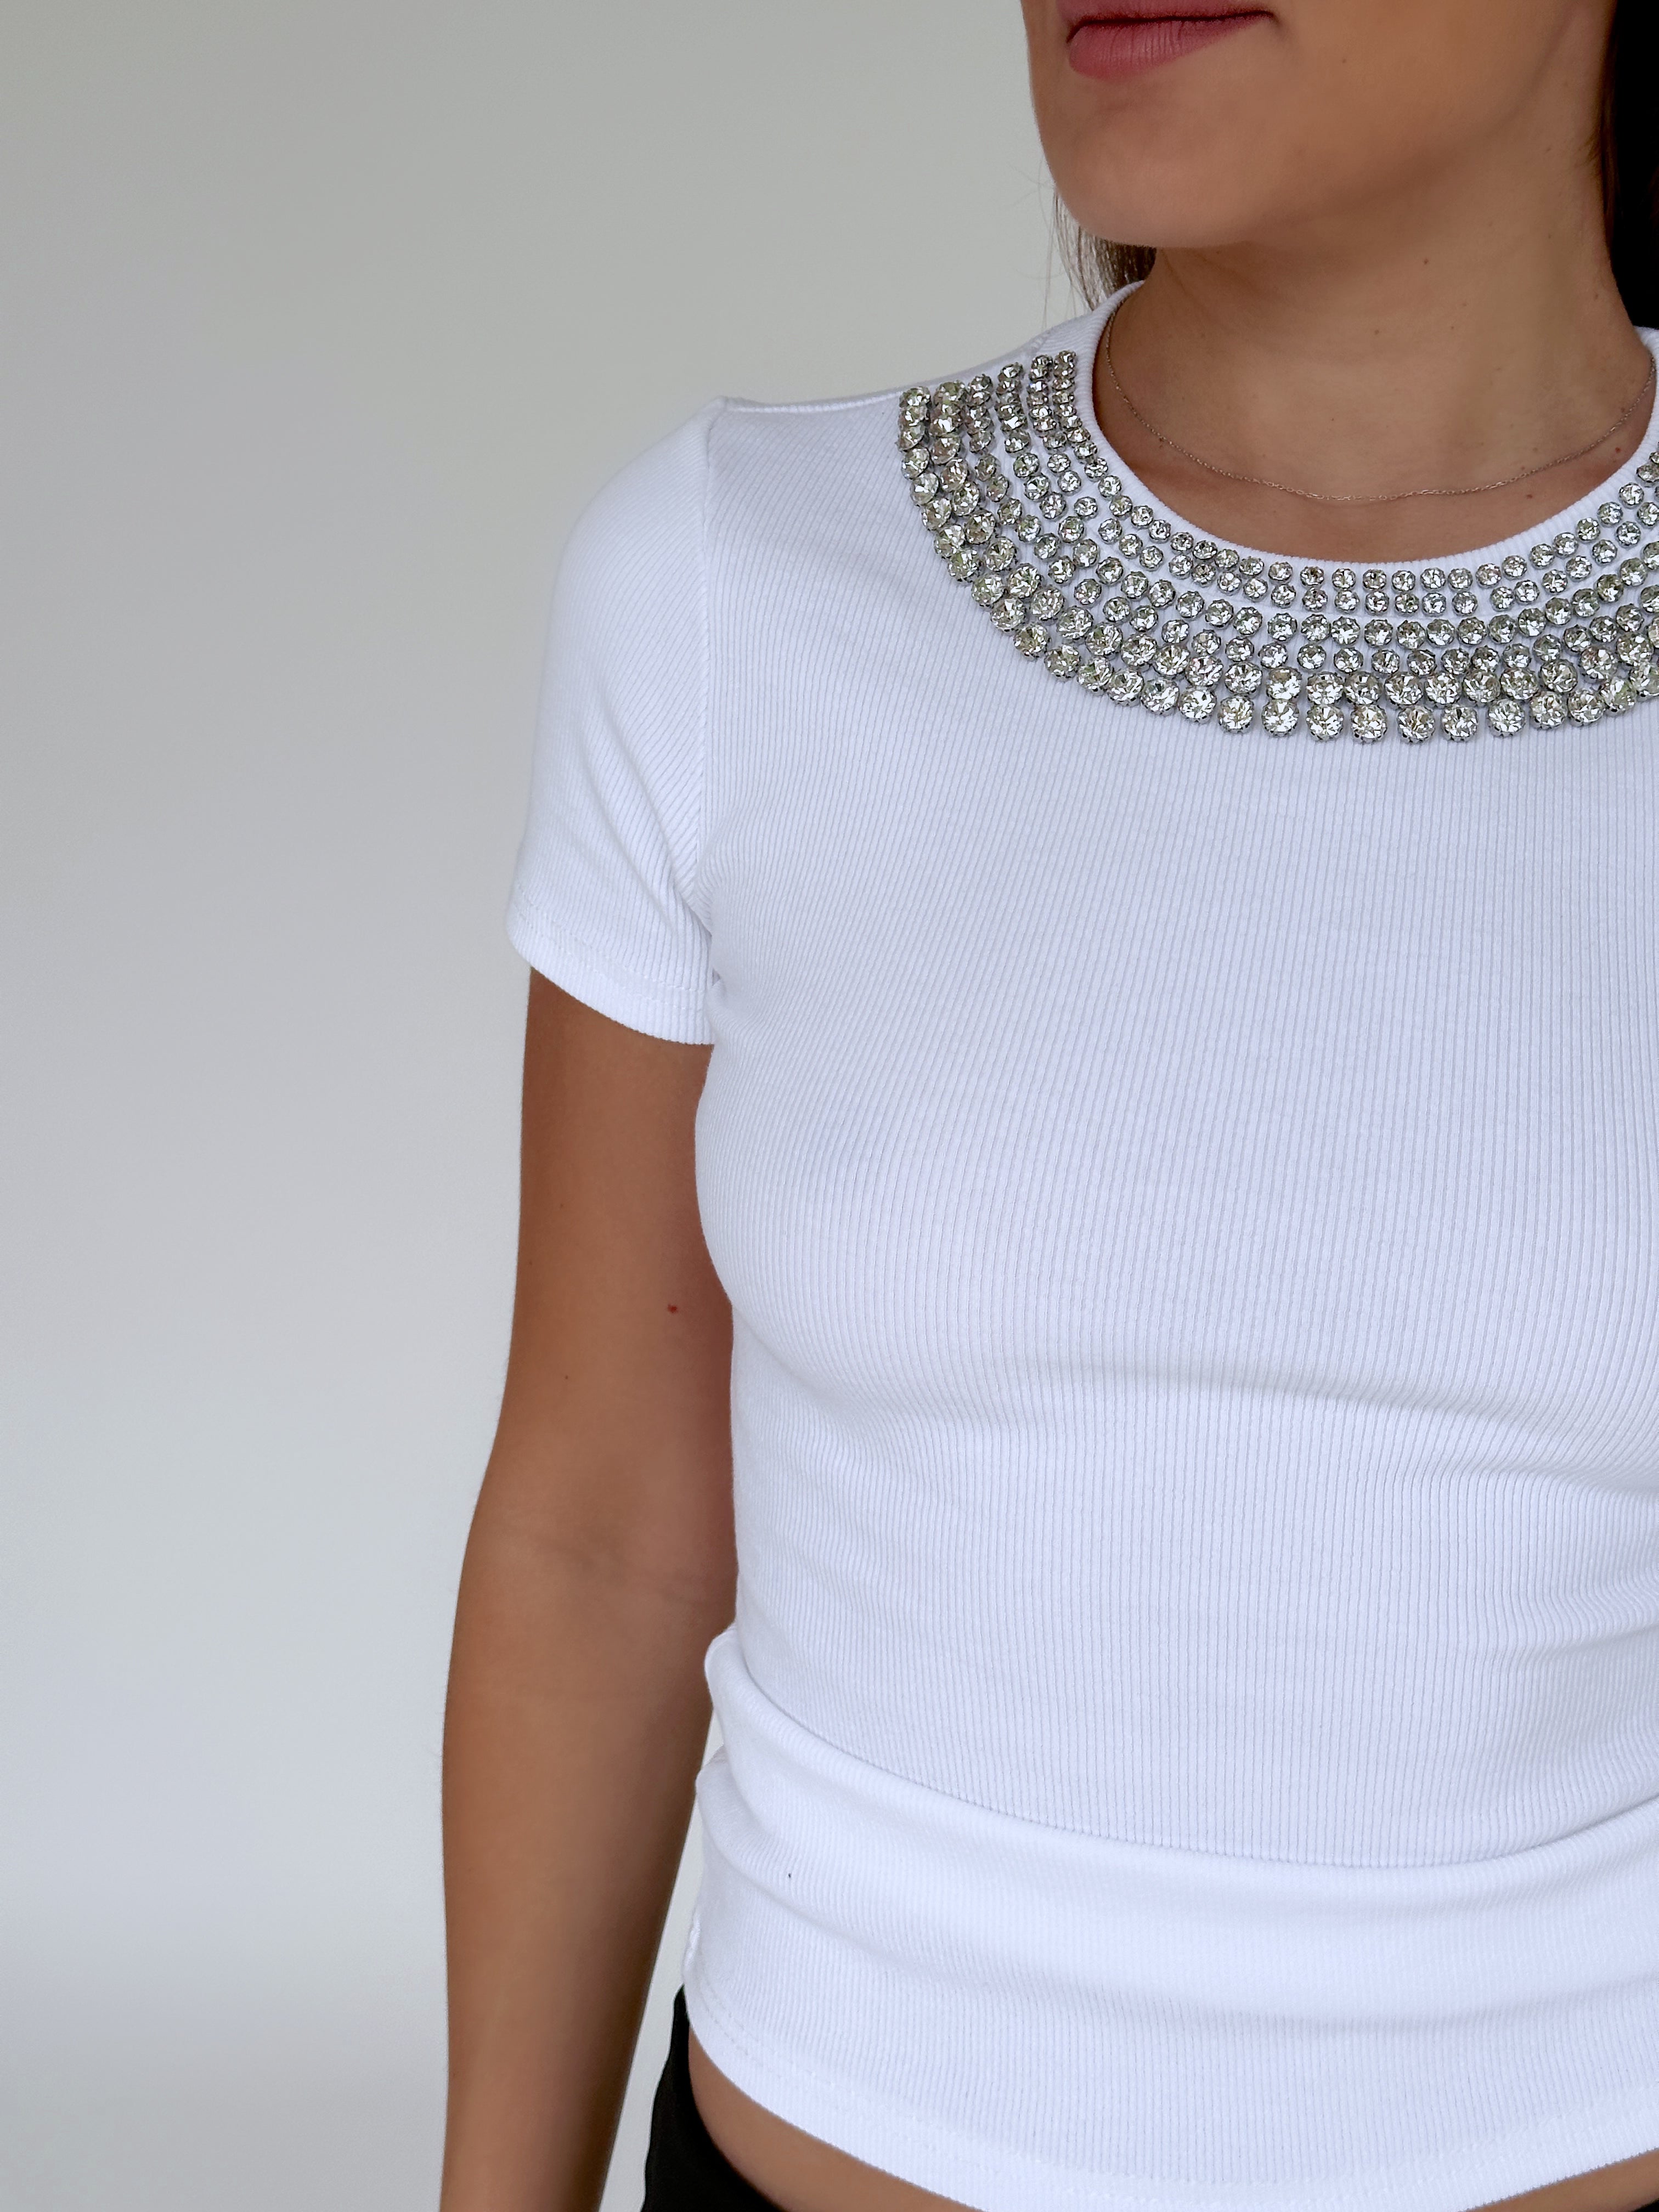 T SHIRT WITH DIAMNATE DETAILS